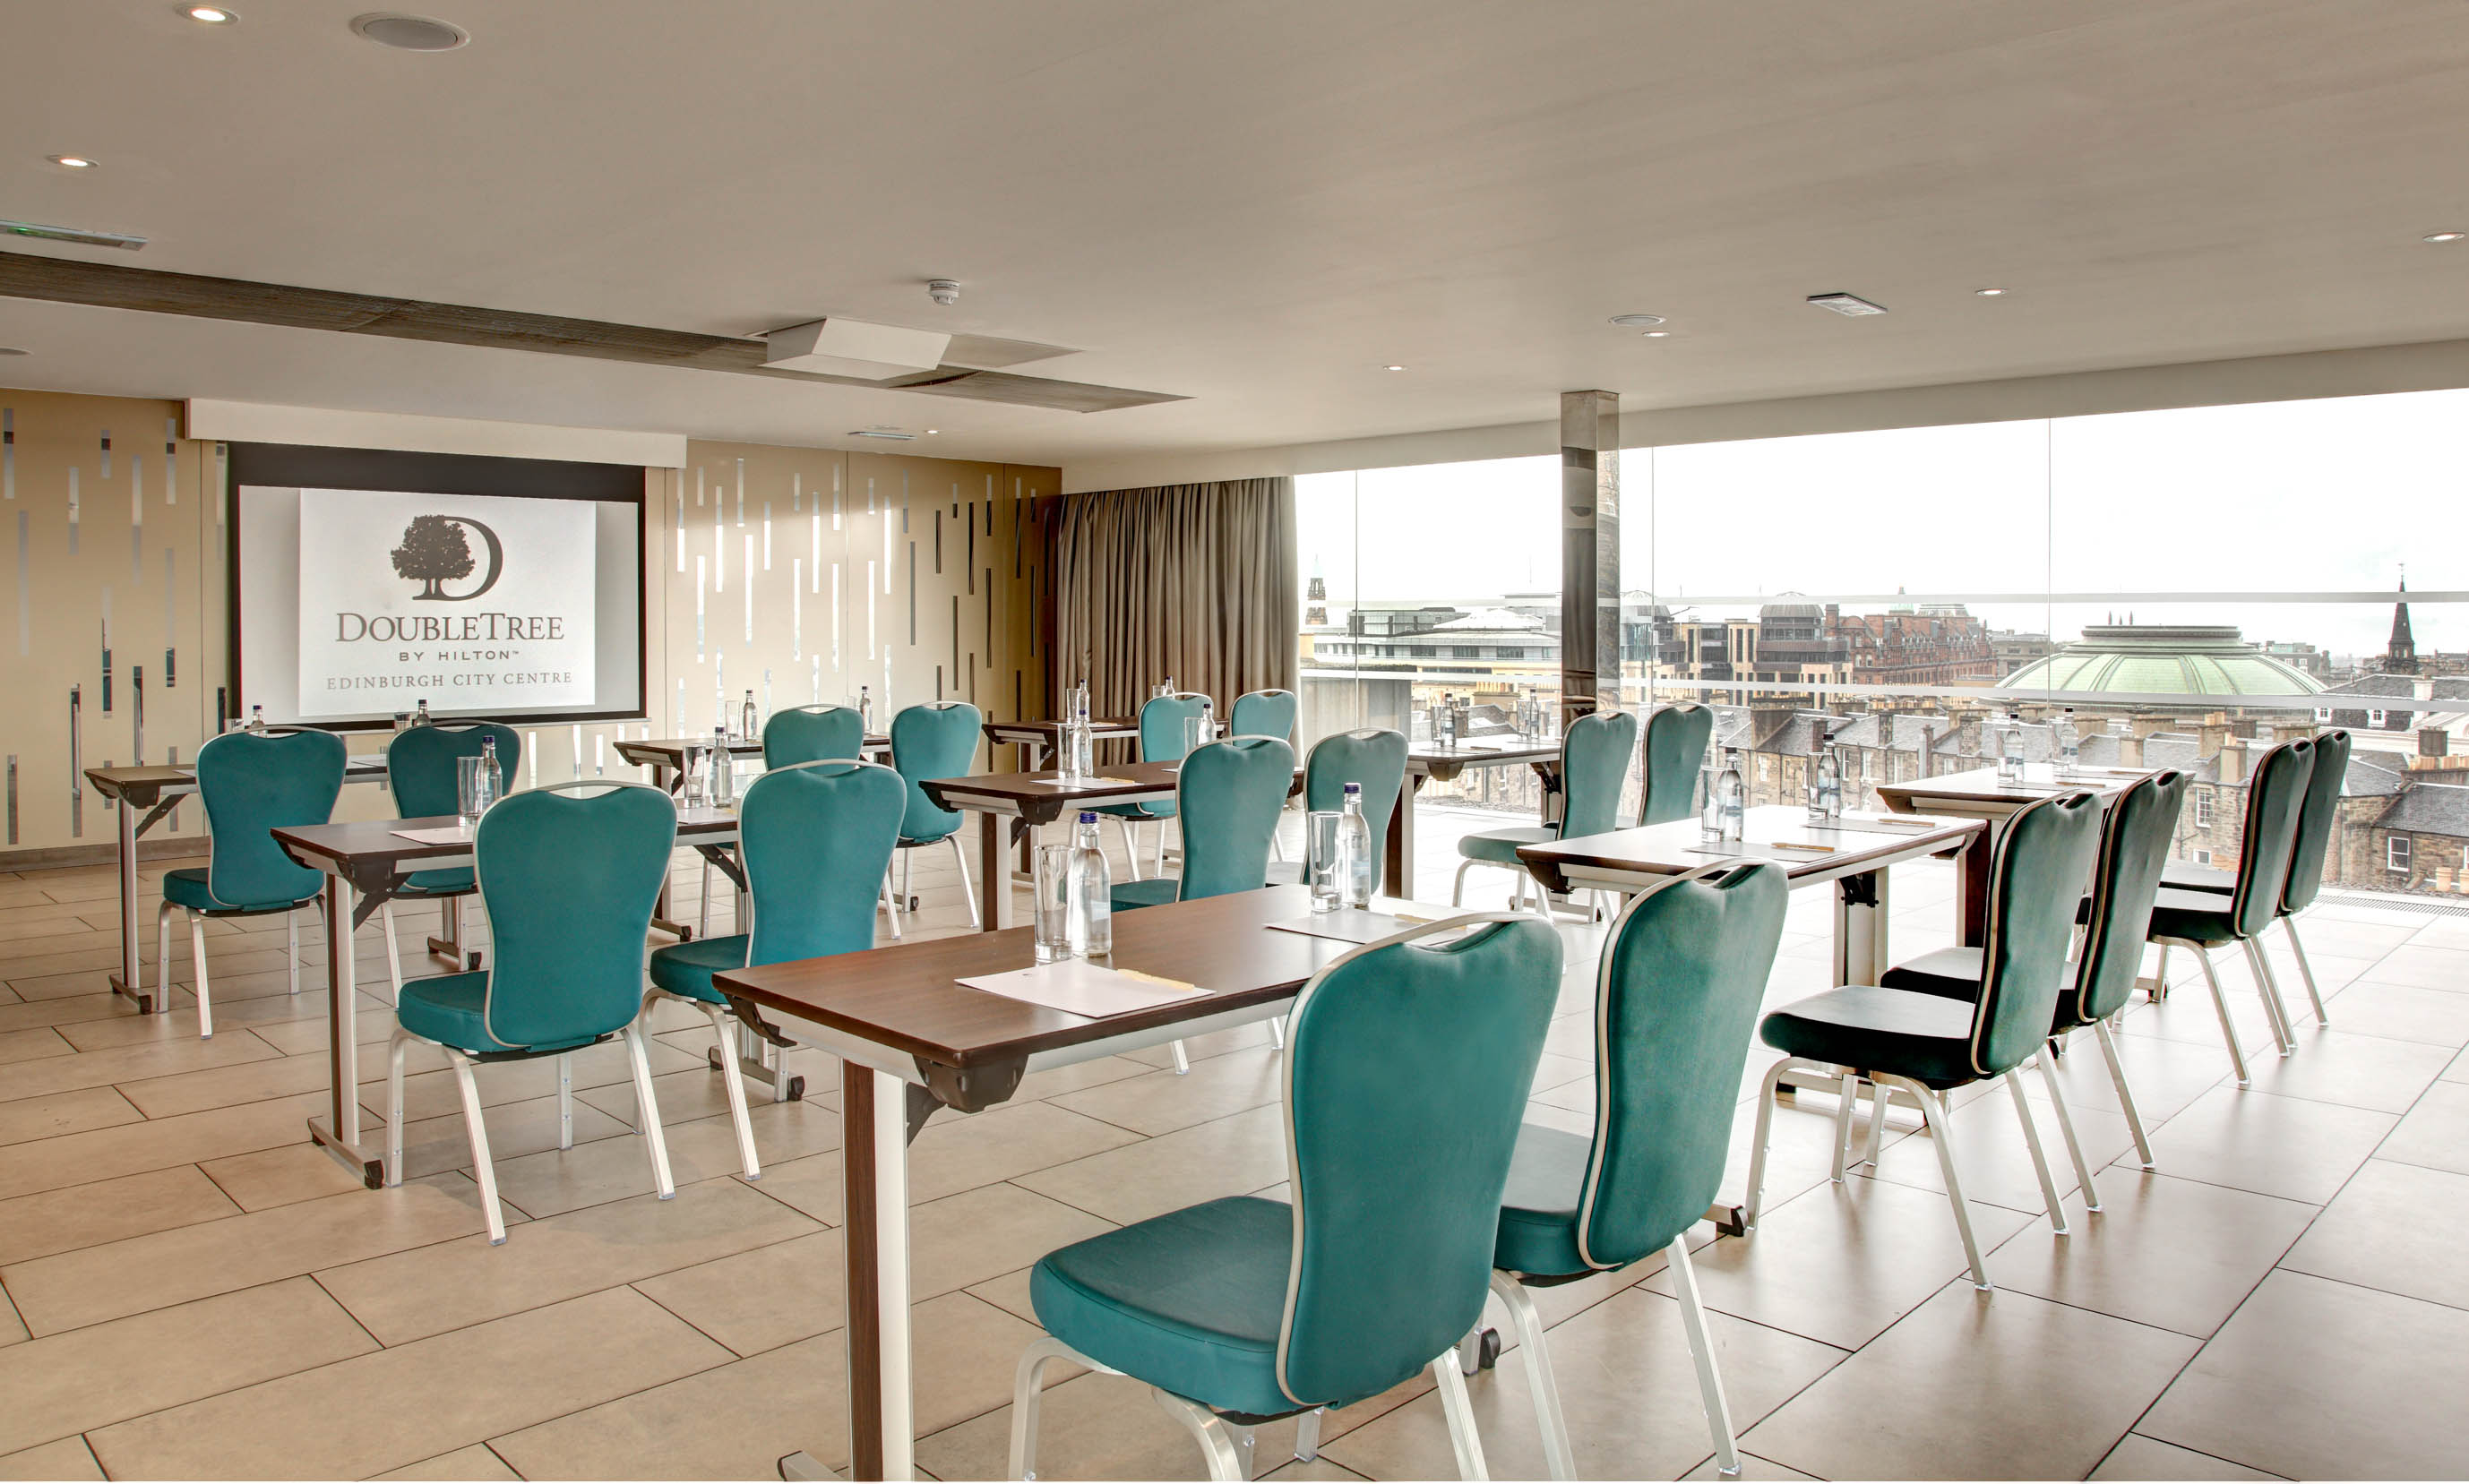 Classroom Setup in Penthouse Meeting Room With Tables and Green Chairs Facing Presentation Screen, Overhead Projector, and Large Window With Open Drapes to City View